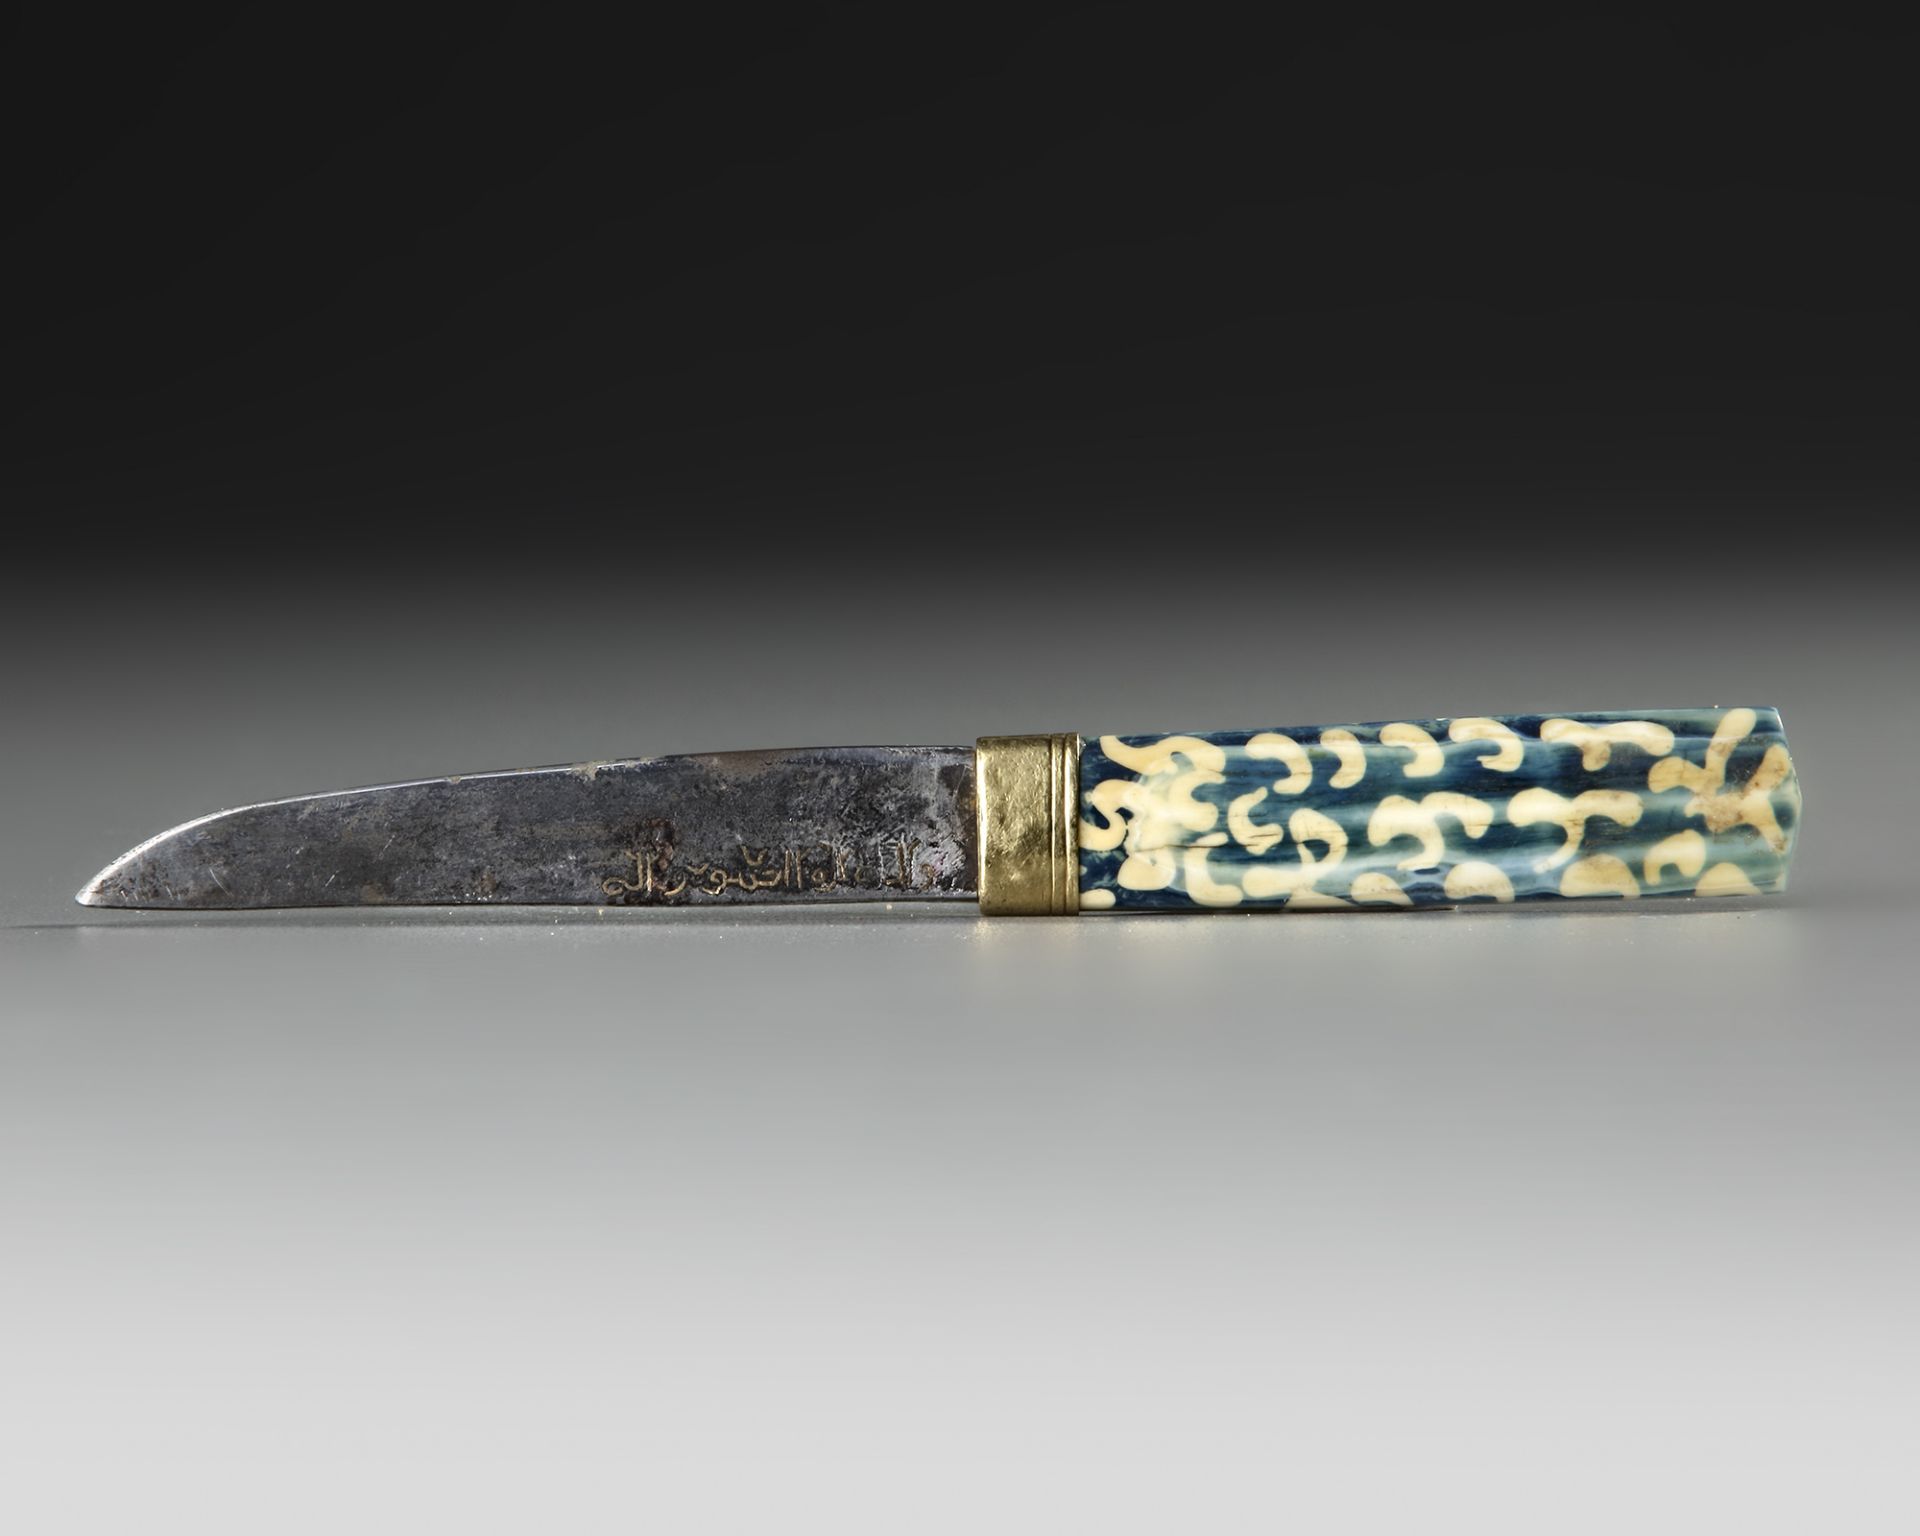 A SMALL INSCRIBED KNIFE, LATE TIMURID, 15TH-16TH CENTURY - Image 7 of 12